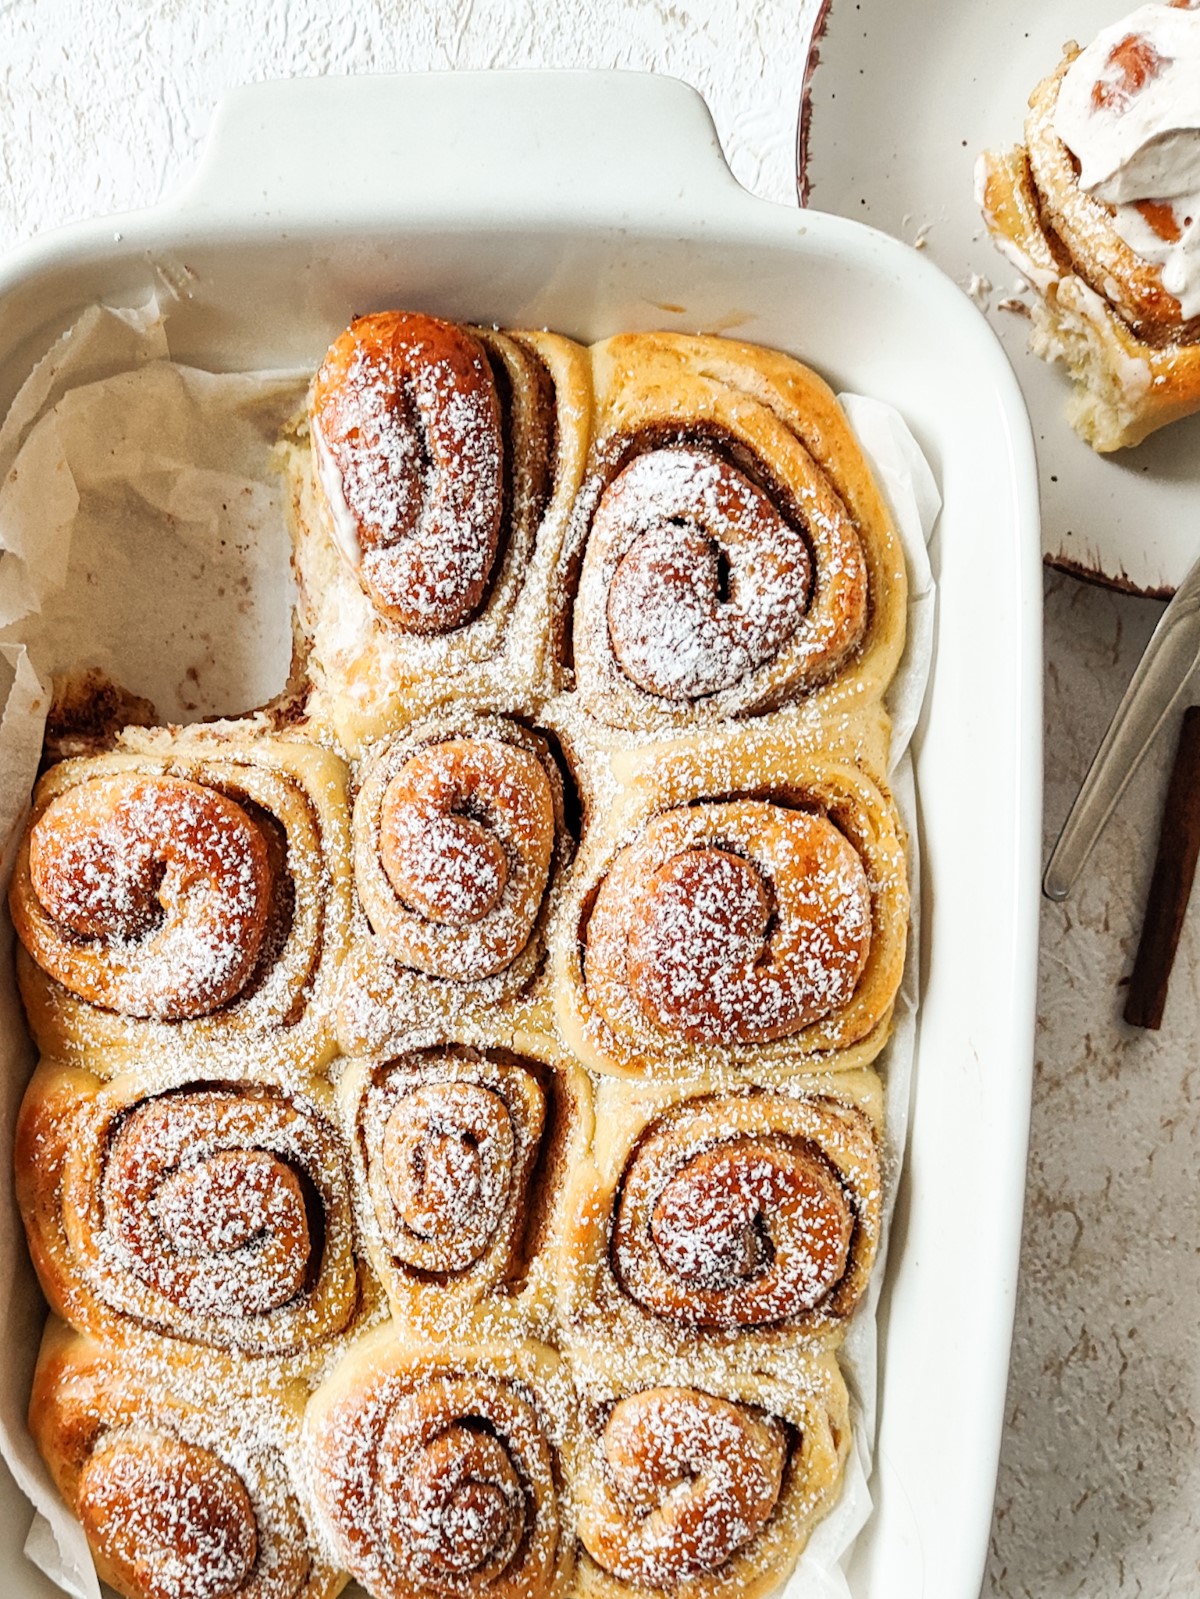 Milk Bread Cinnamon Rolls - Milk bread cinnamon rolls in a white baking tray